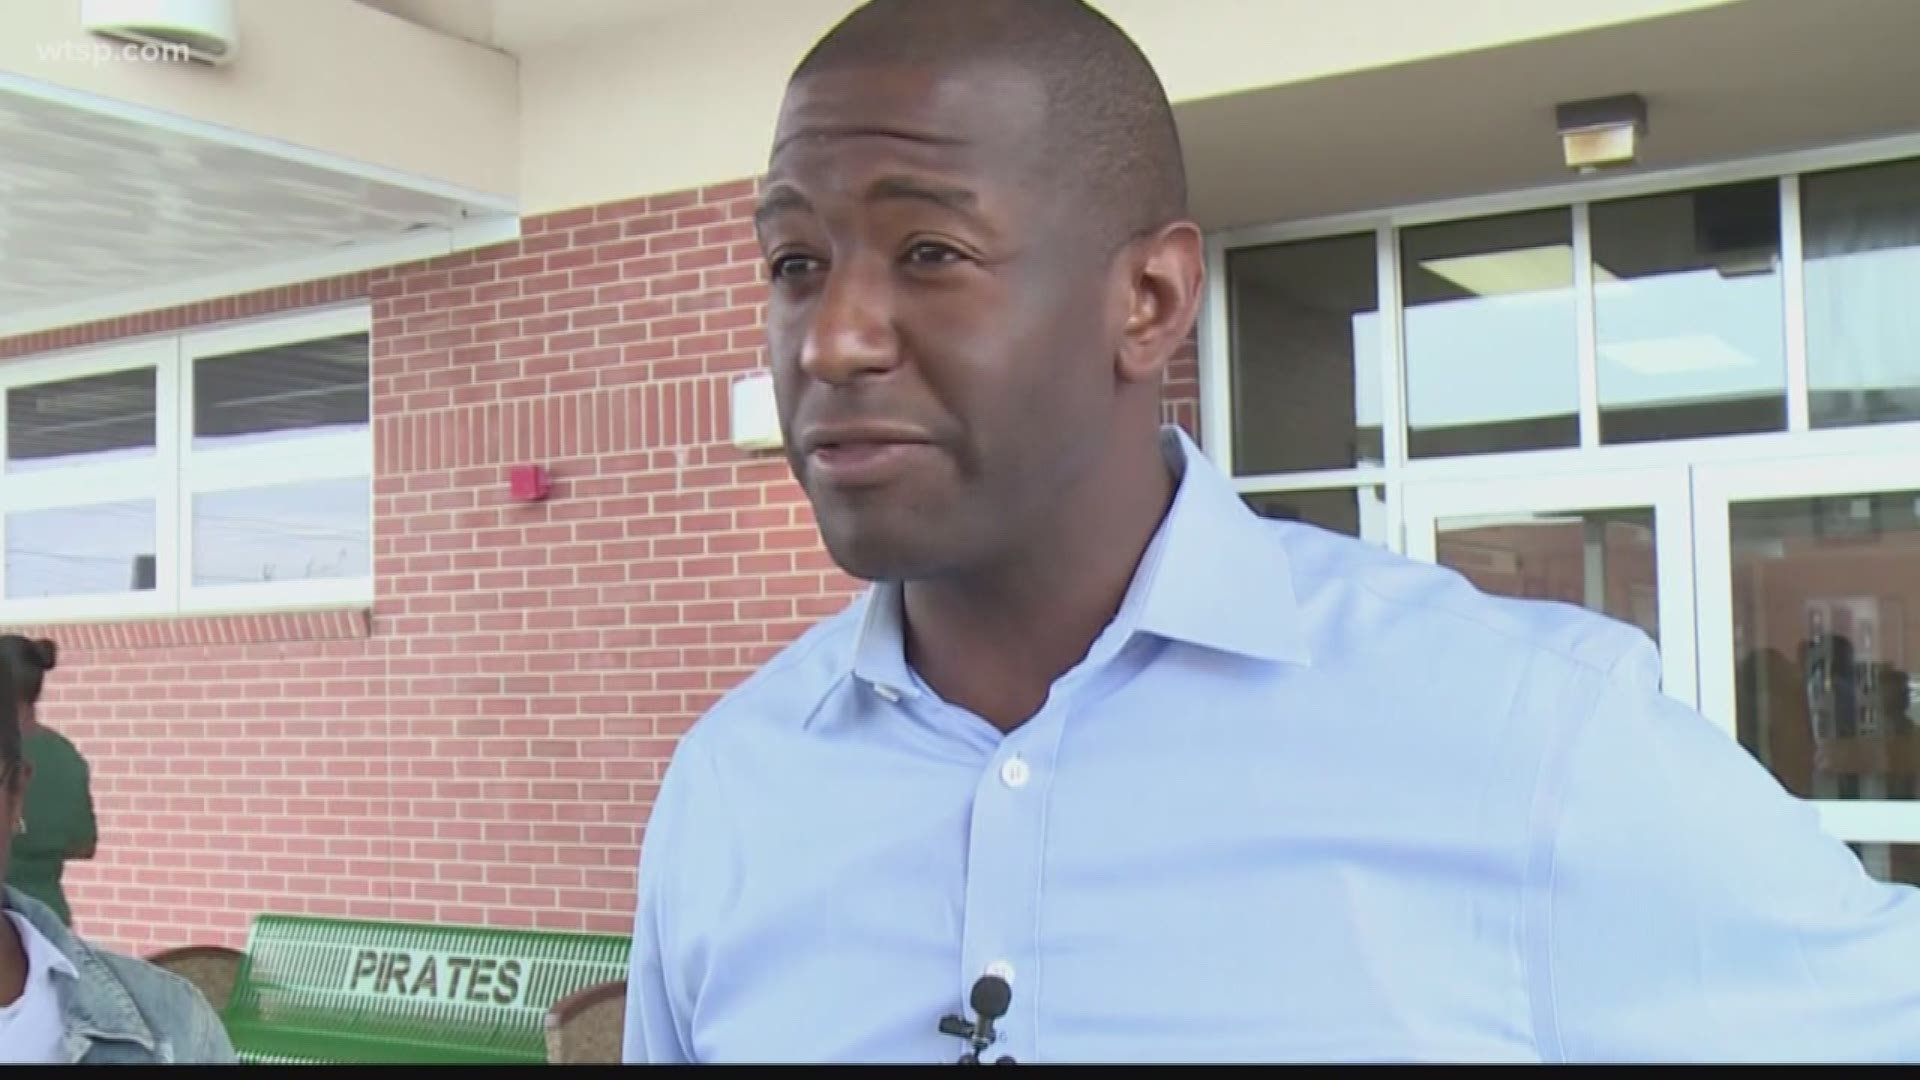 Former gubernatorial candidate Andrew Gillum agreed Wednesday to pay a $5,000 fine to settle an ethics complaint that he violated civil law by accepting a gift from a lobbyist.